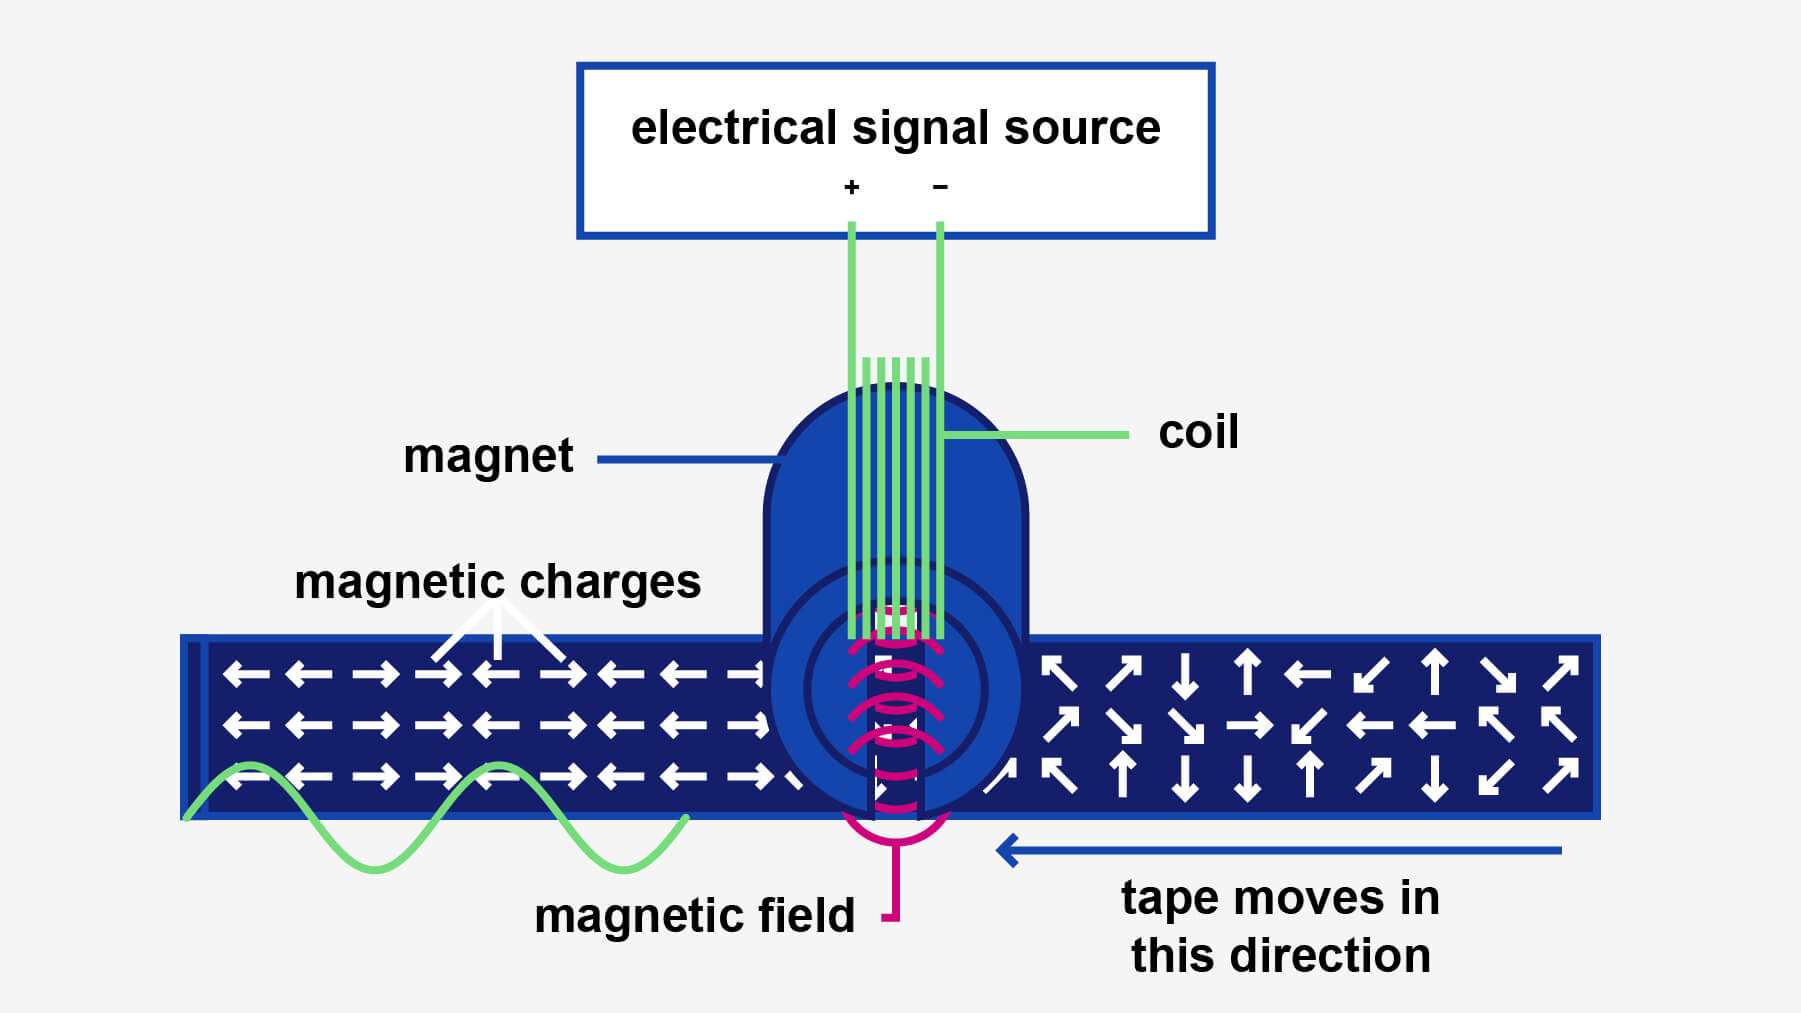 How to record with an analog tape deck 

As the tape passes through the magnetic field it magnetically charges particles along the tape. As a result, the imprinted magnetic charges along the tape resemble the fluctuations of the electrical signal.

More specifically, the magnitude of the magnetic charges on the tape resembles the amplitude levels in the recording.